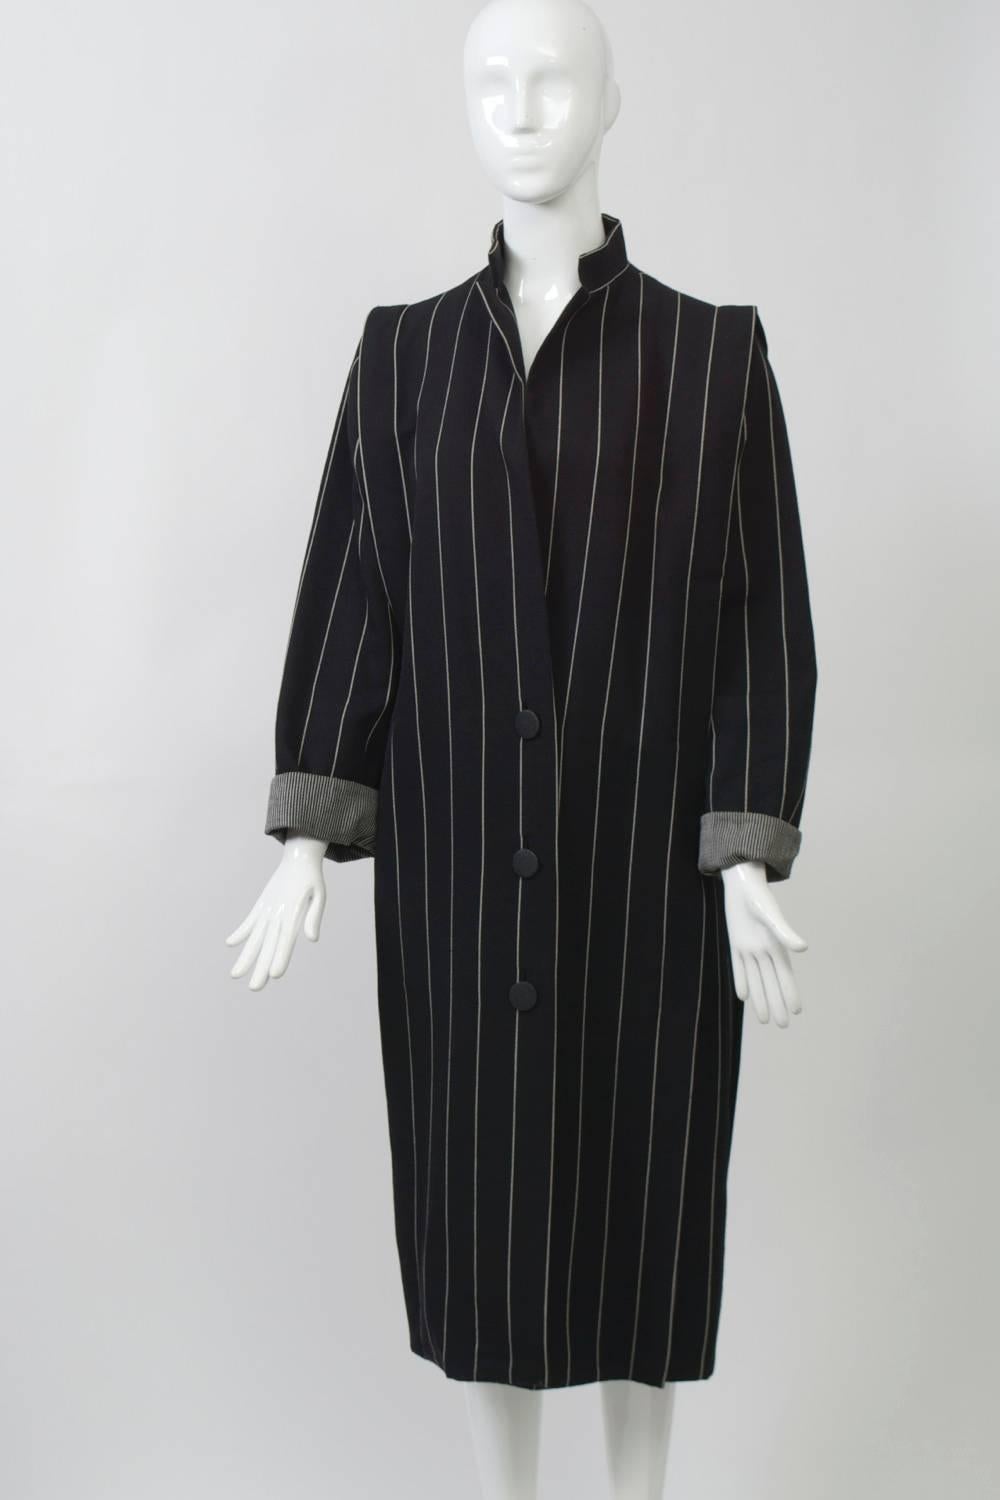 Pencil-striped coat in double-faced black and white worsted wool. Loose cut with stitched flange around shoulder line, three-button low closures, and turned-back cuffs. Slit pockets hidden in flange. Lightweight. Approximate size M.